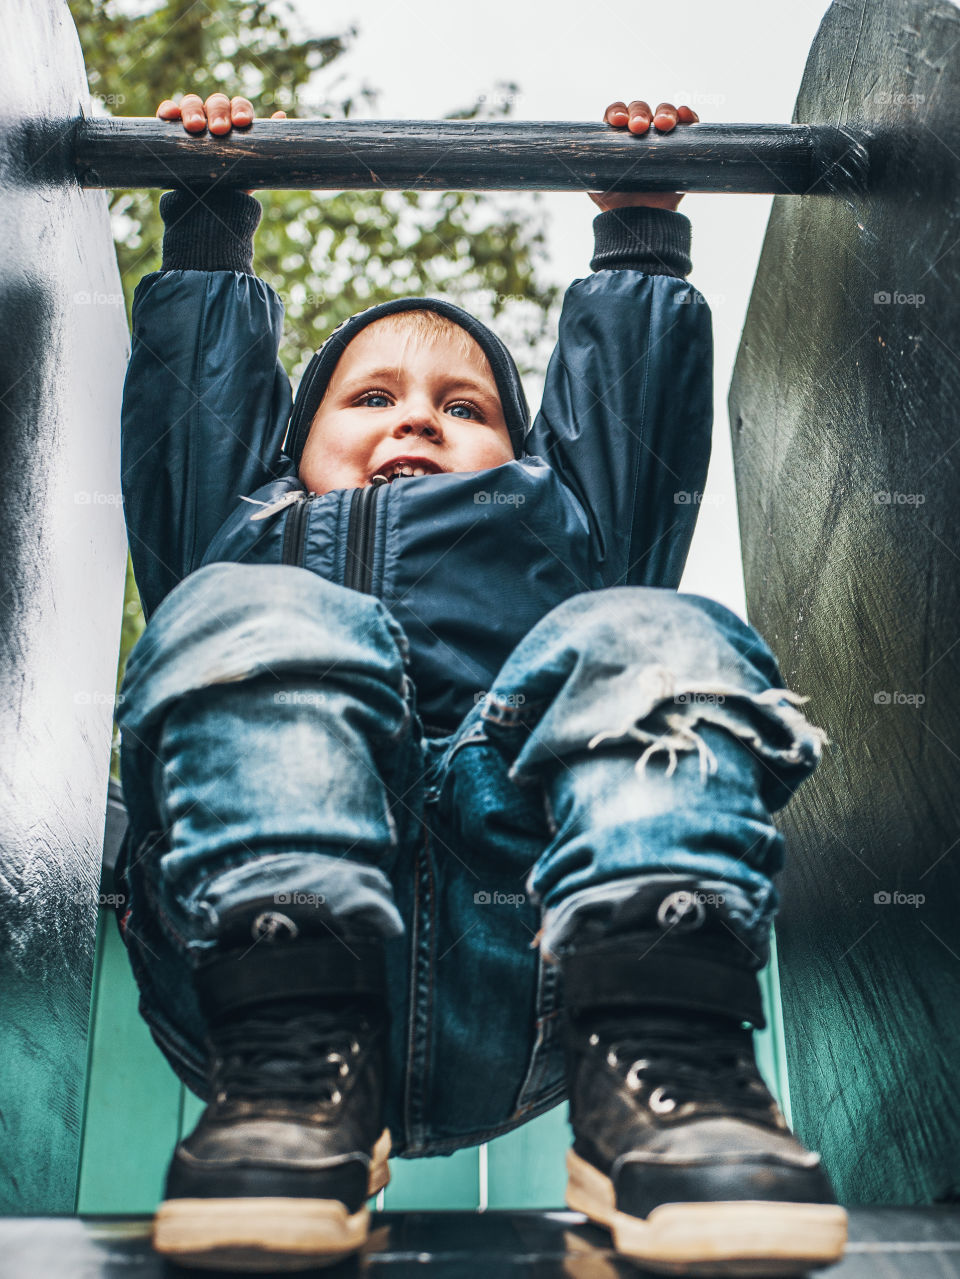 Boy playing on playground, about to go down a slide. Wearing a blue bomber jacket and jeans.